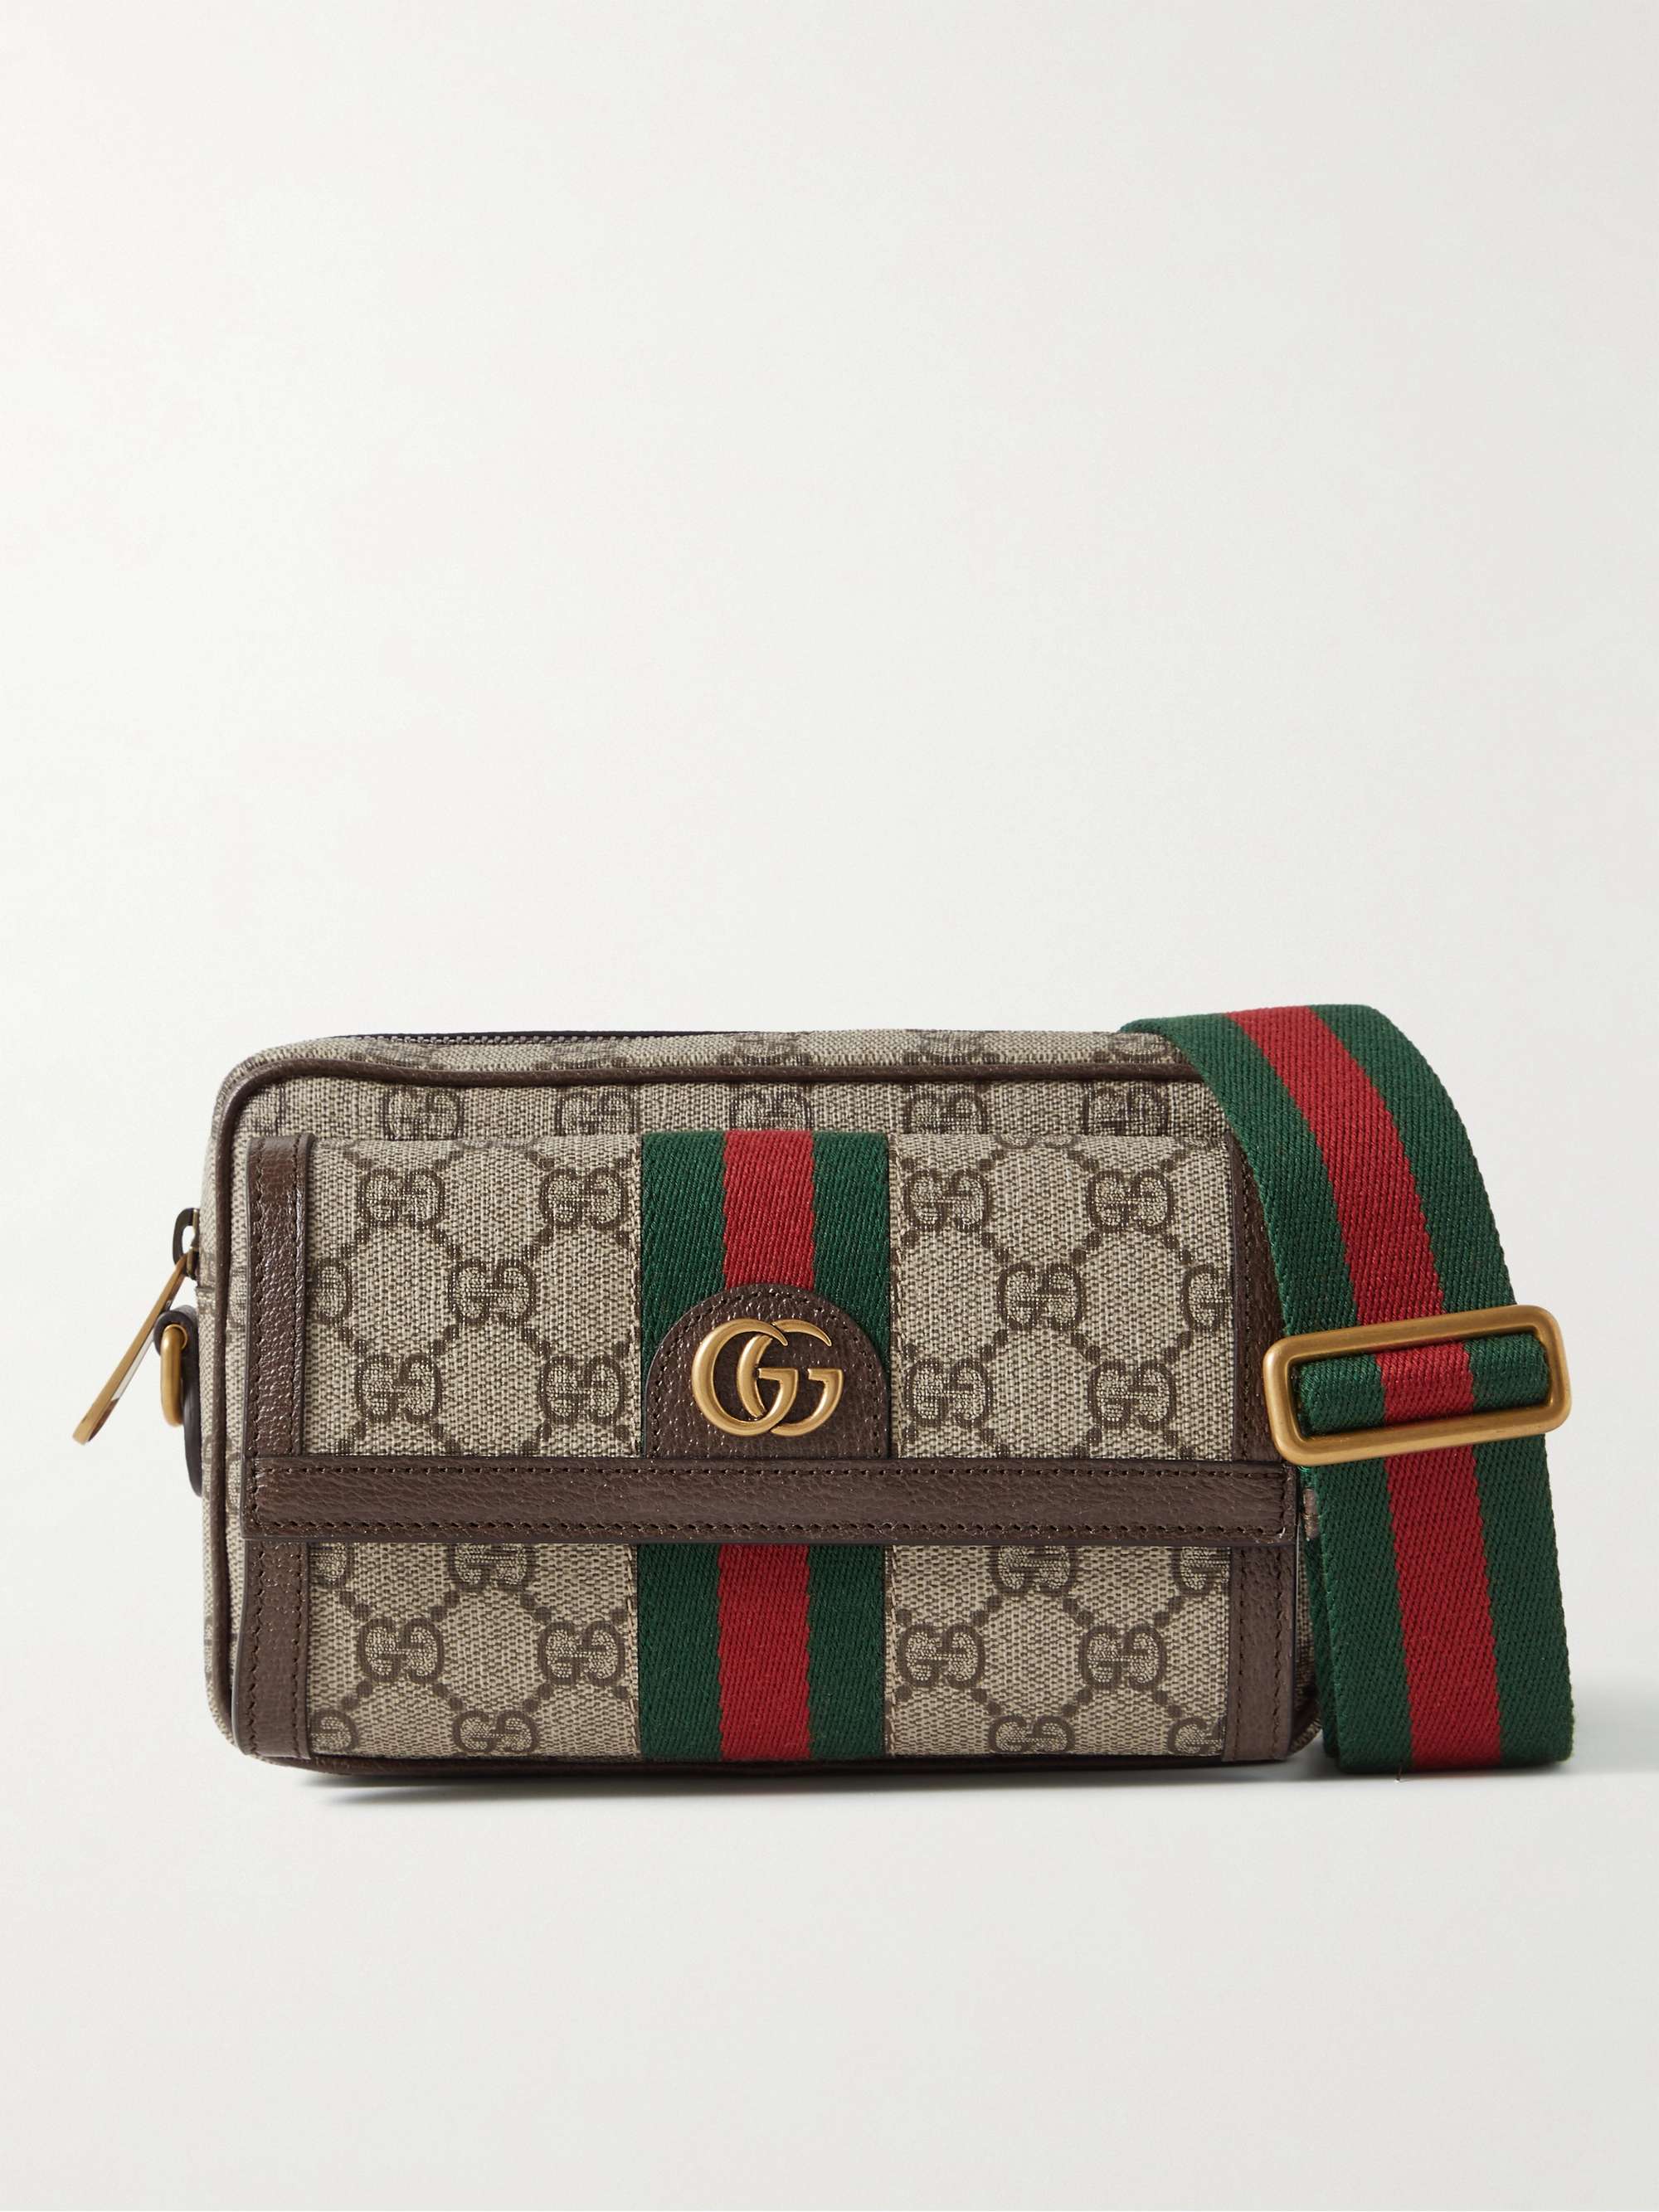 Gucci Men's Supreme Gg Canvas Messenger Bag With Planet Patches In